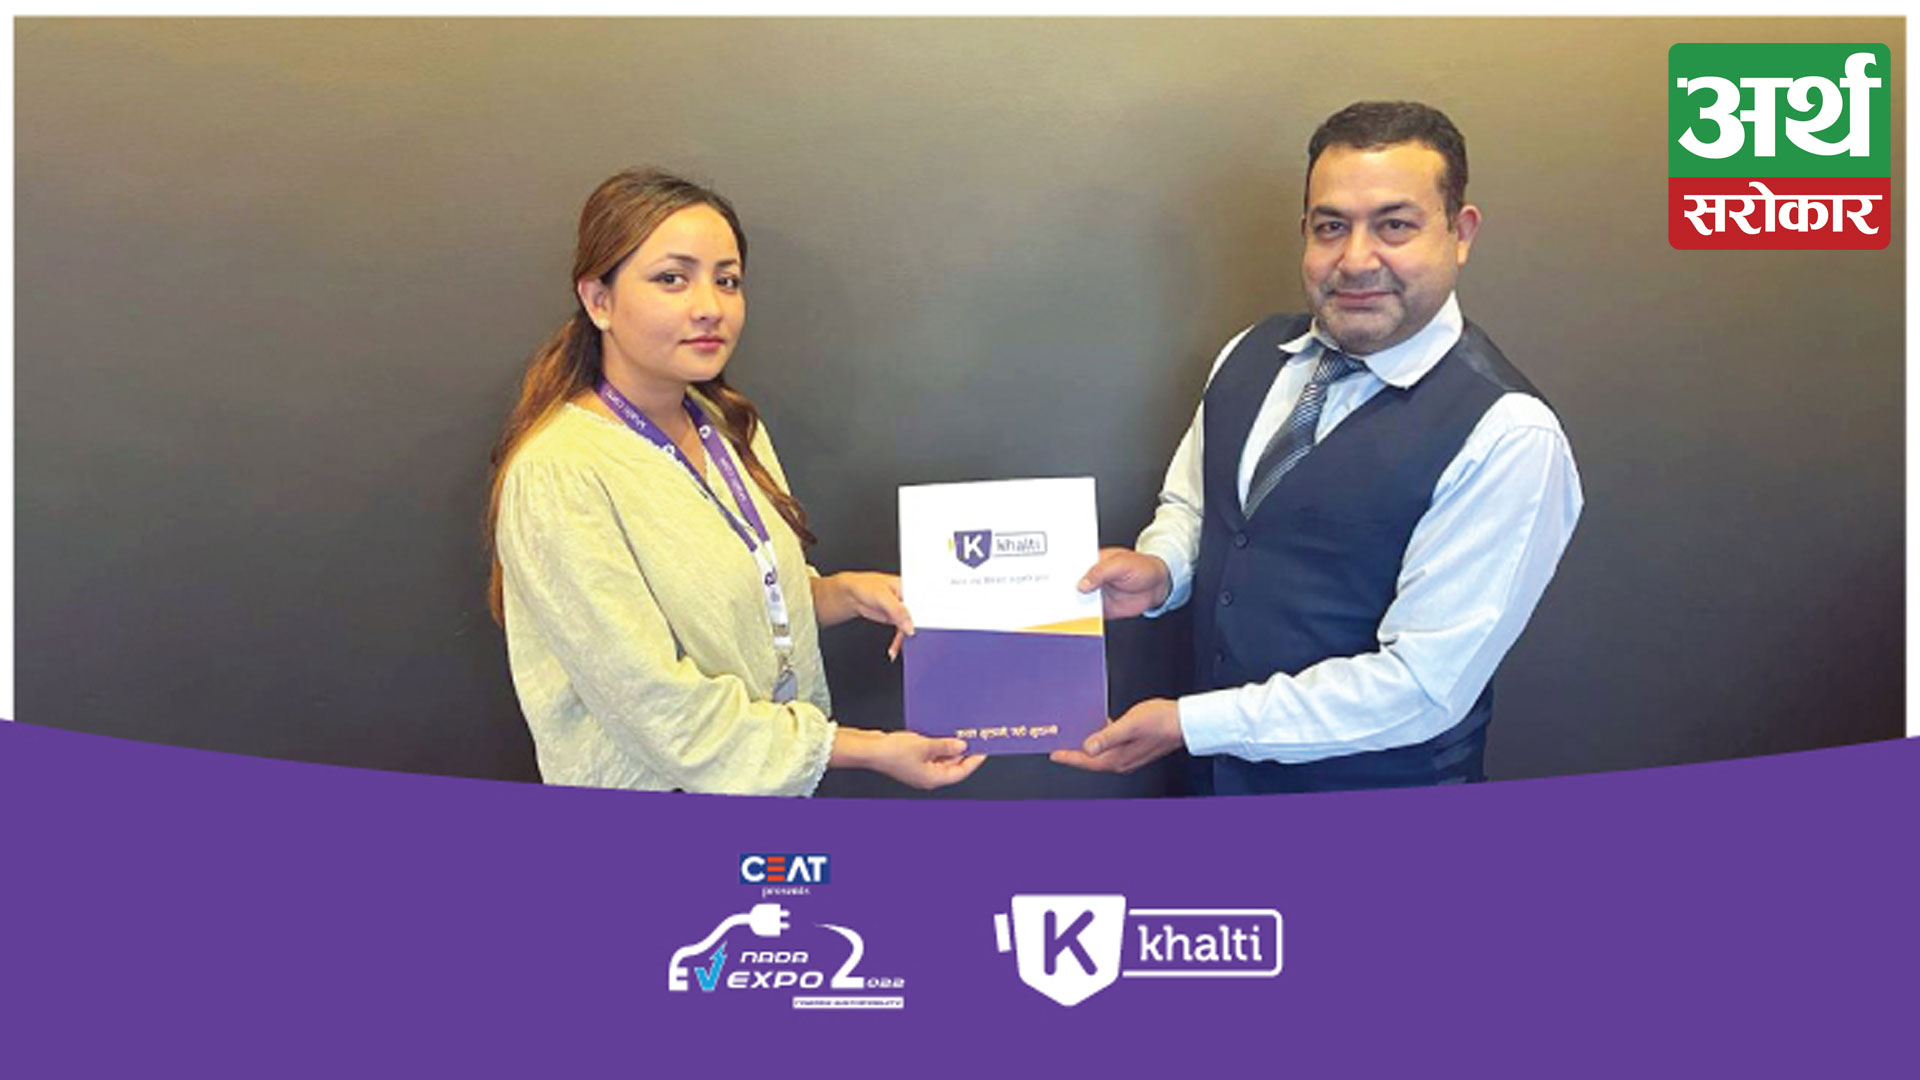 Khalti partners with ‘NADA EV Expo 2022’ as an exclusive ticketing partner providing 25% Cashback